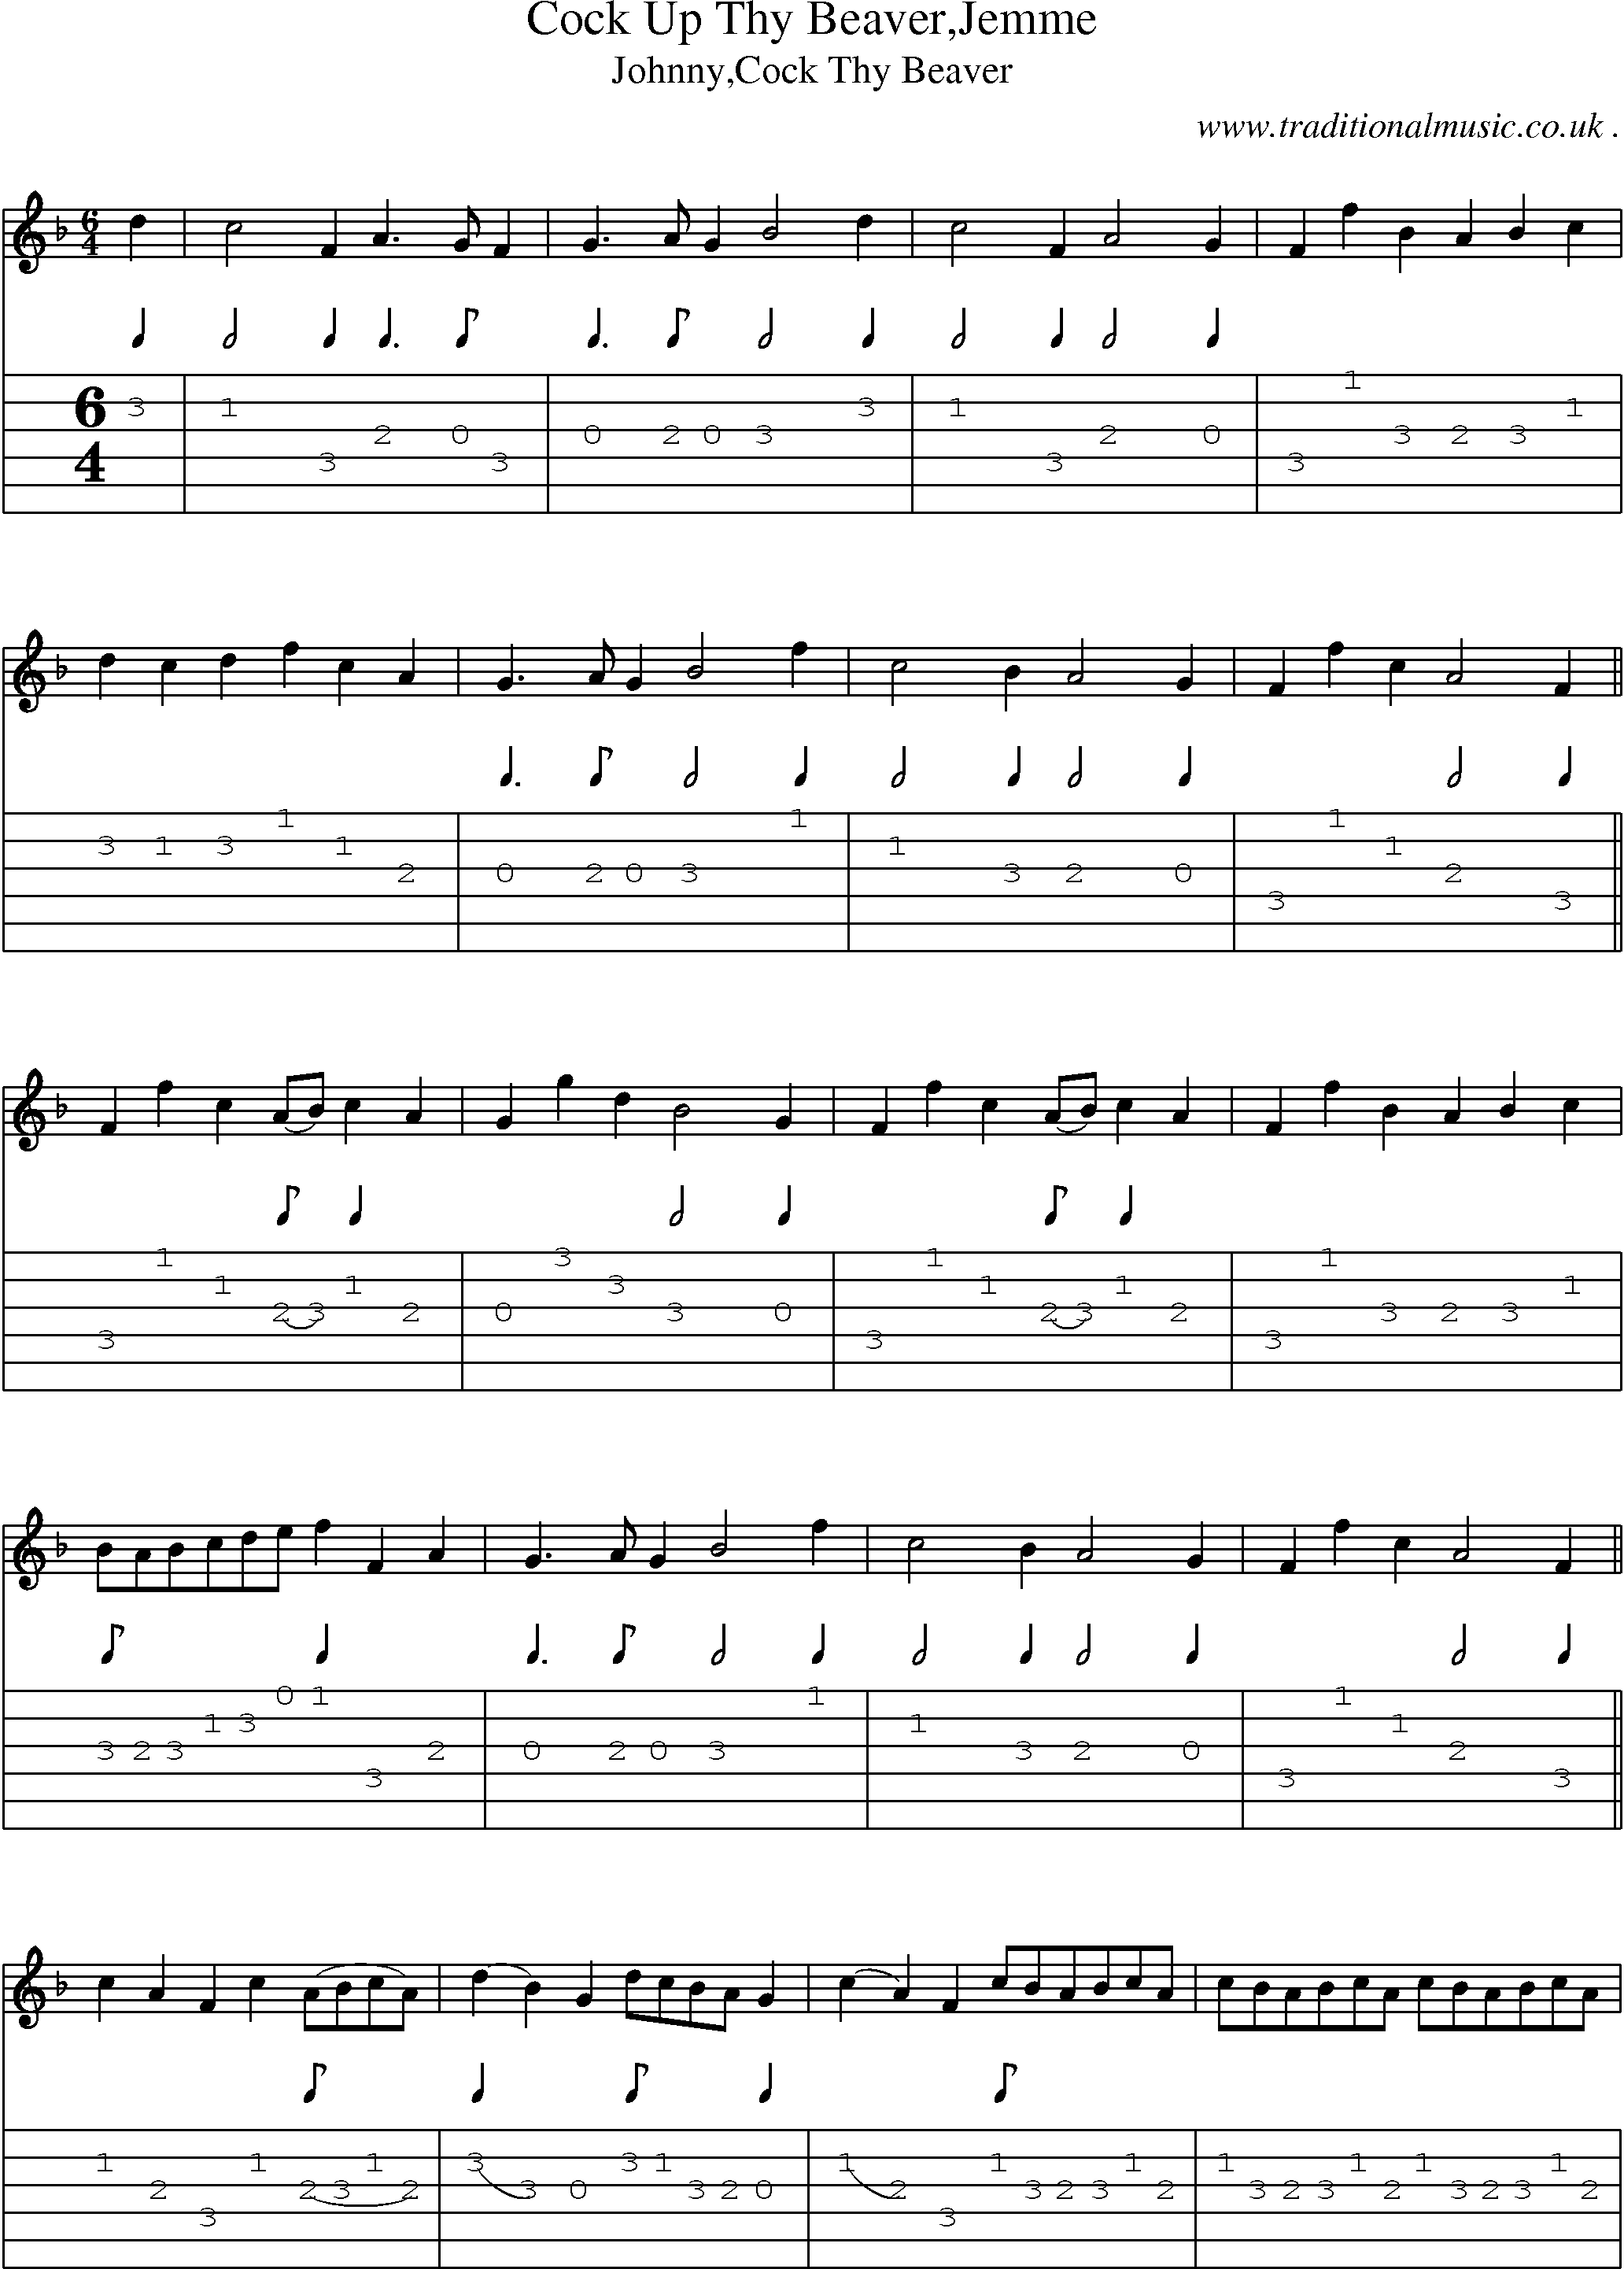 Sheet-Music and Guitar Tabs for Cock Up Thy Beaverjemme